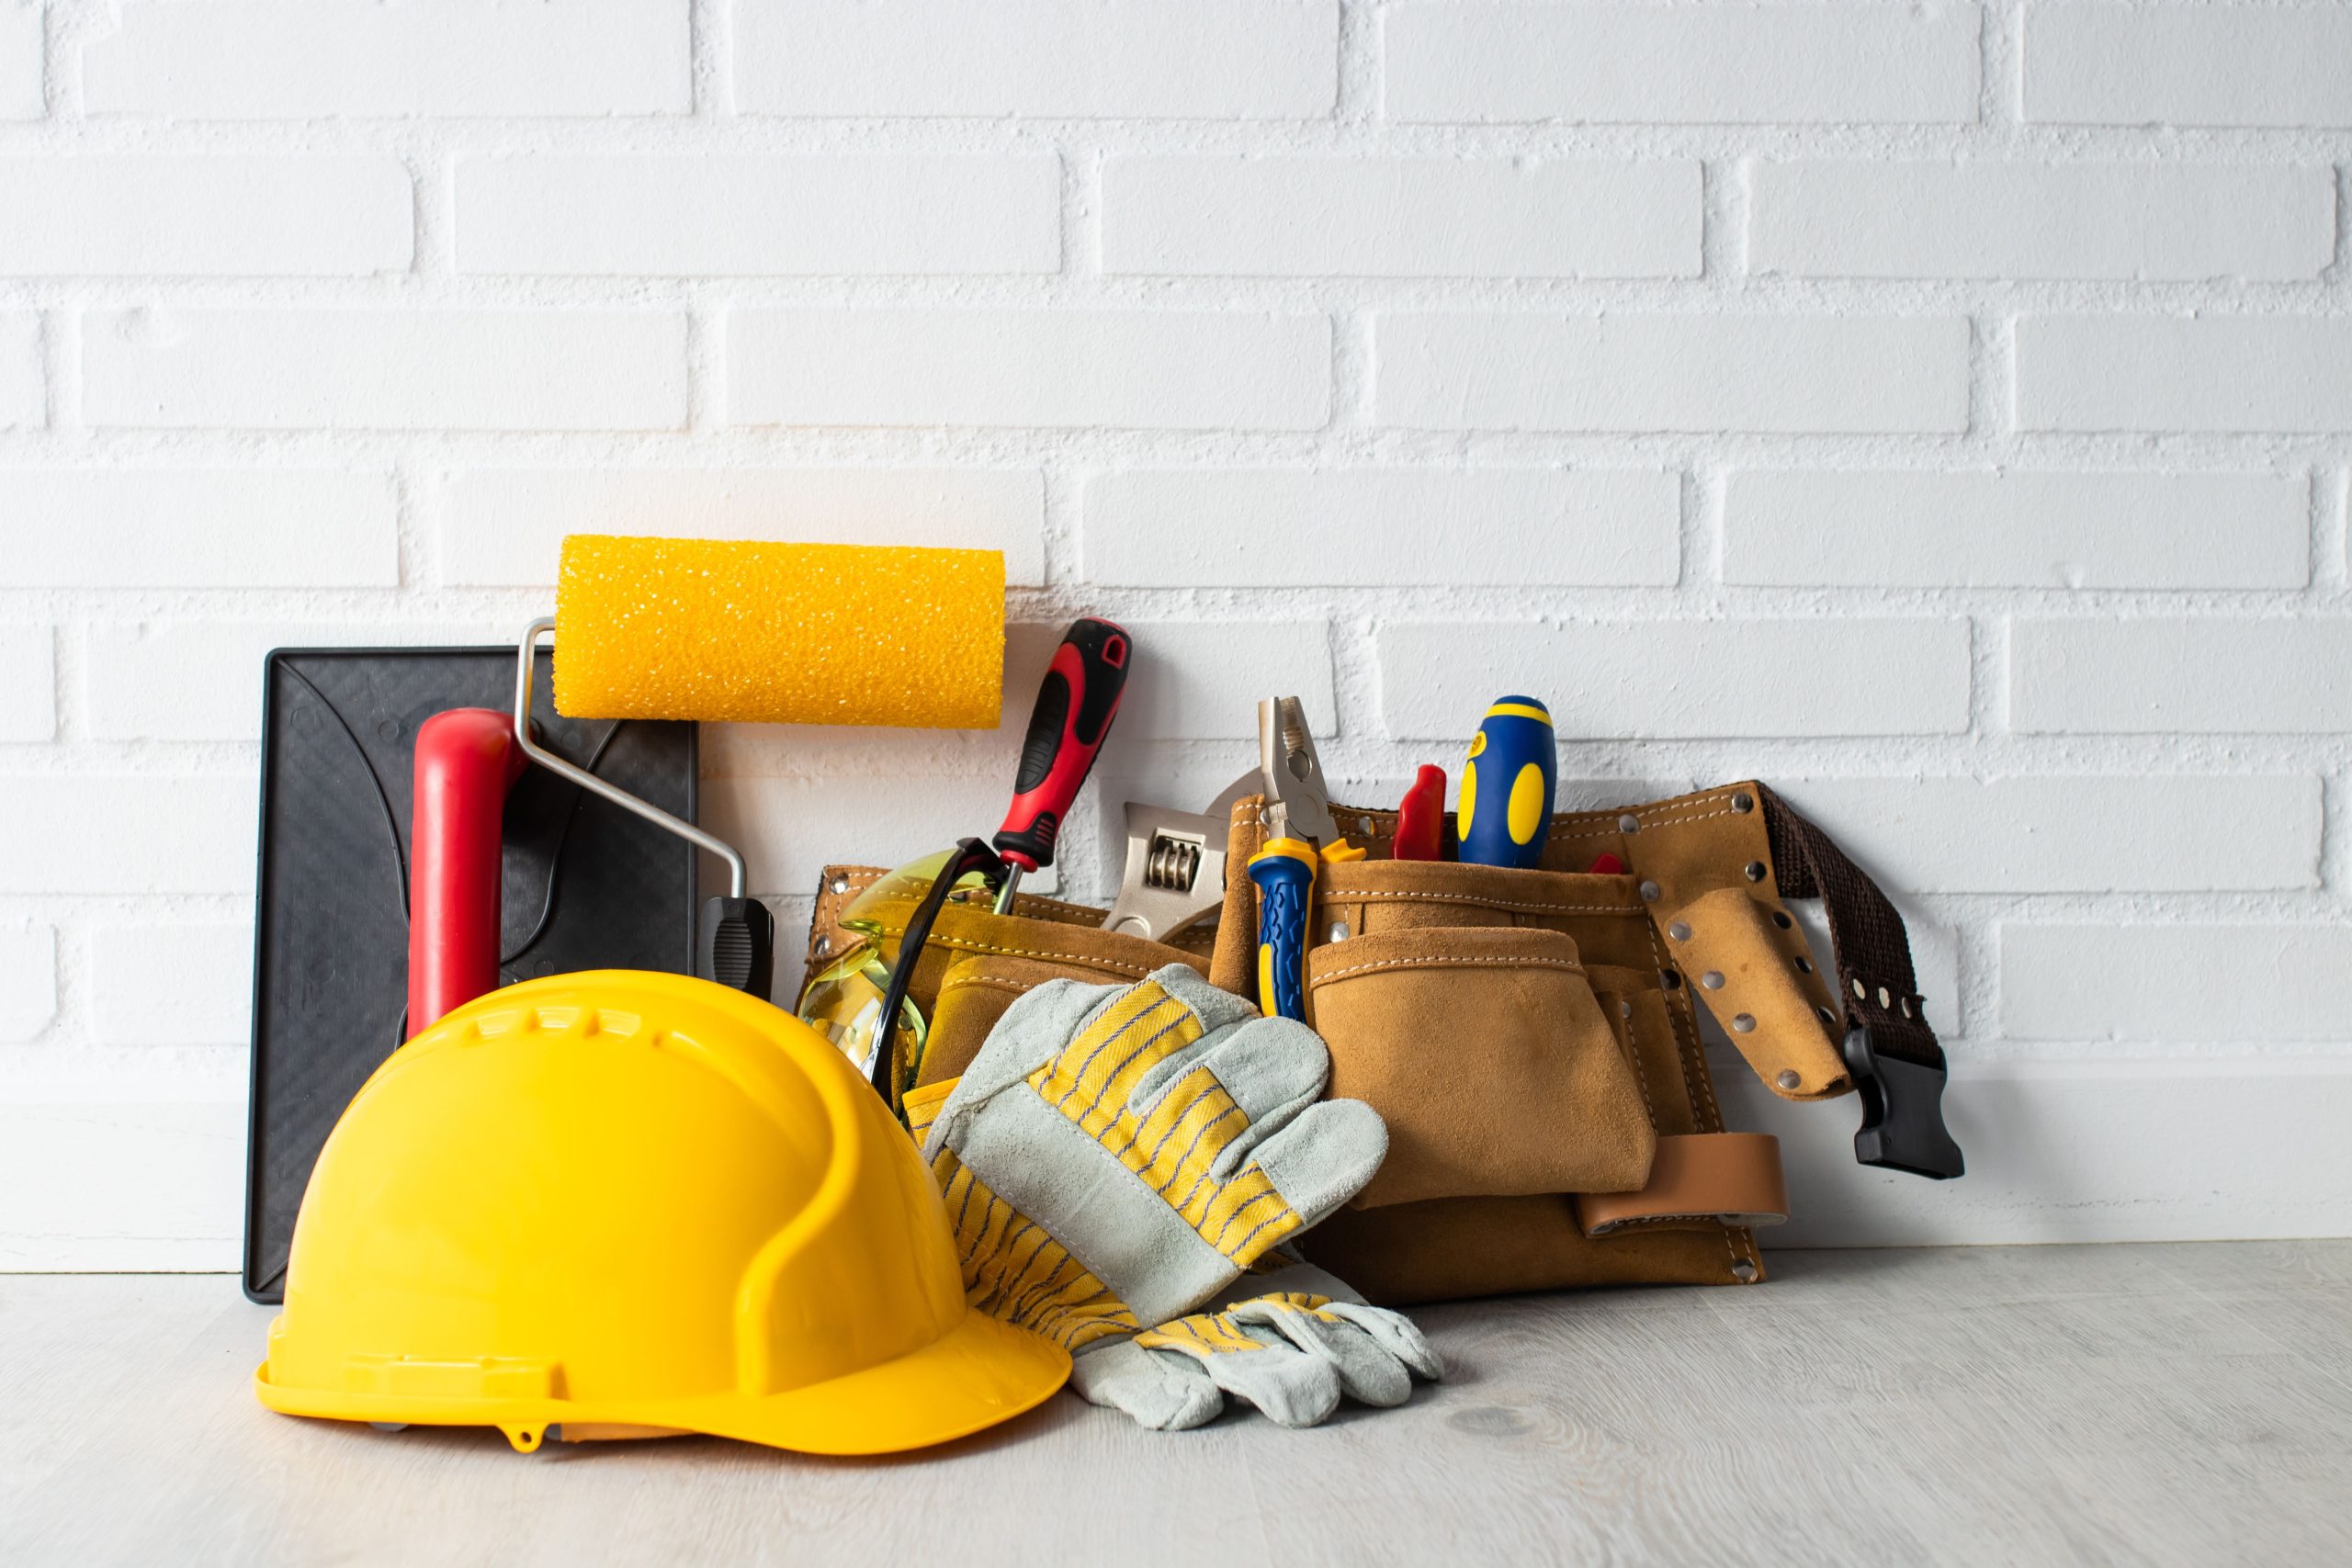 Do you trust your tradespeople?